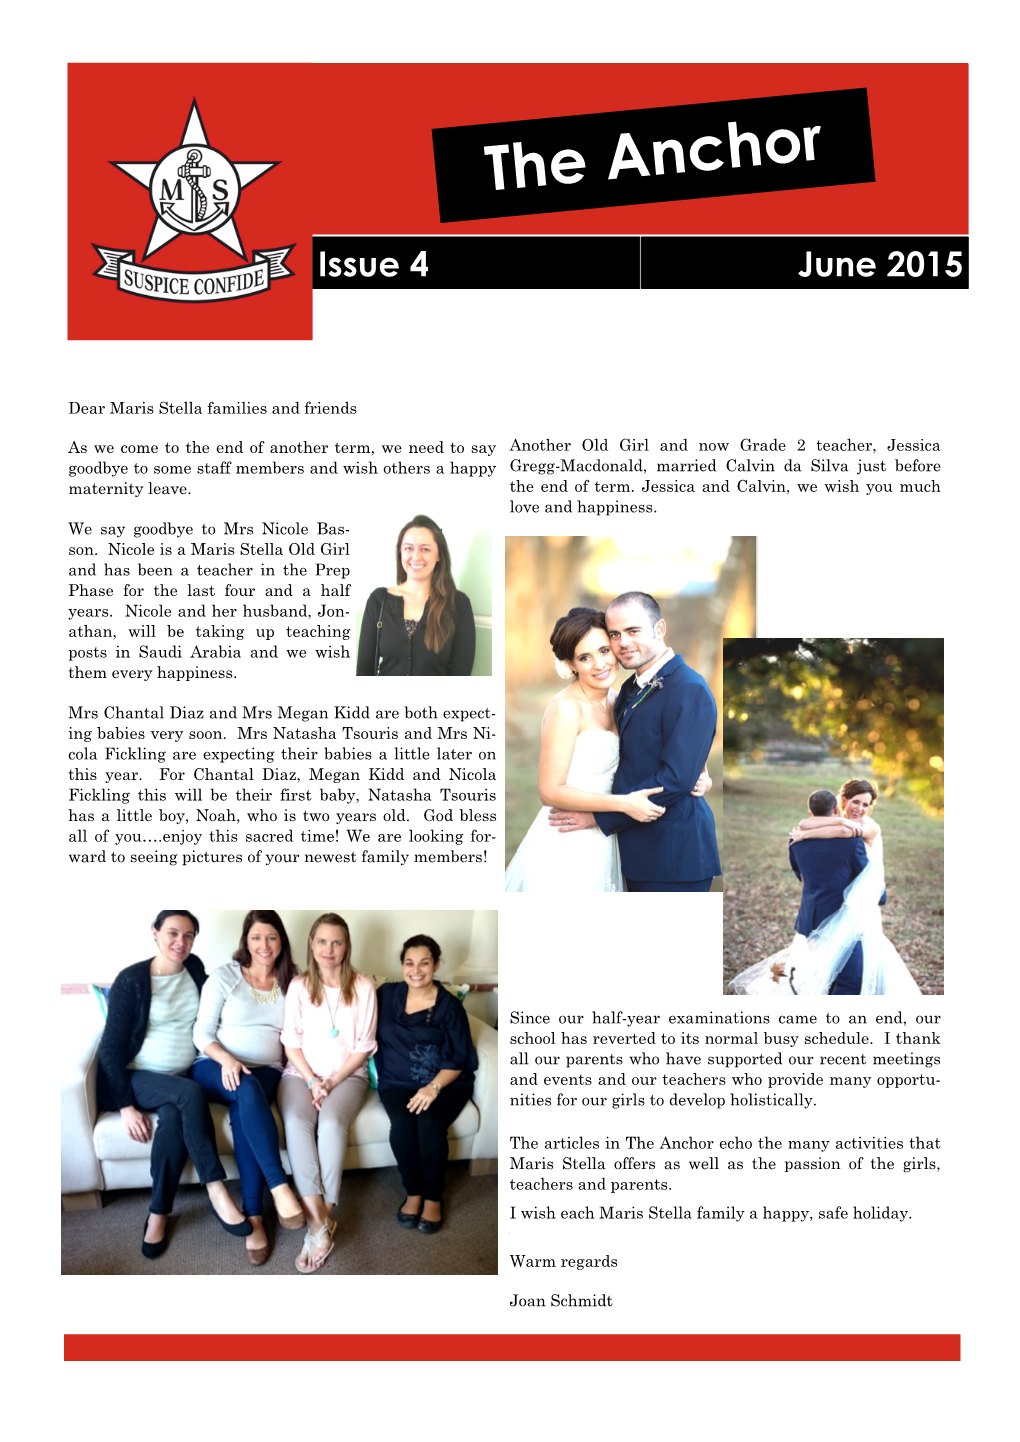 The Anchor Issue 4 June 2015